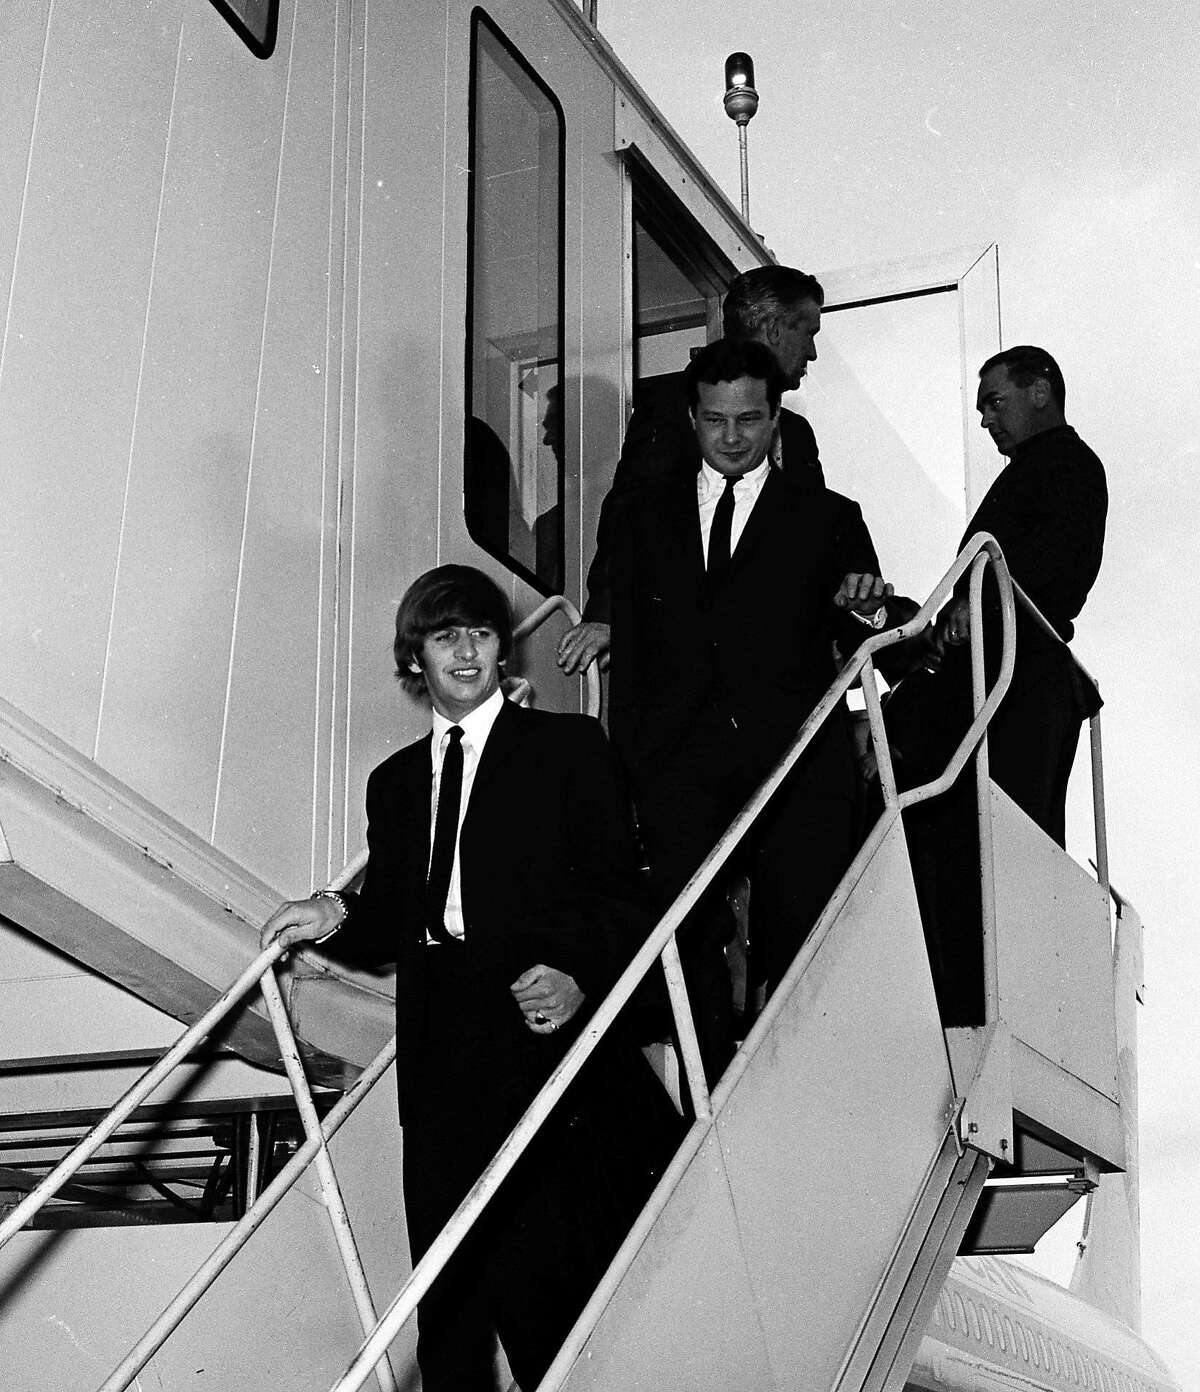 Bedlam at San Francisco International Airport as Ringo Starr of the Beatles stops here to change planes on his way to Australia to rejoin his band mates on their Australian tour